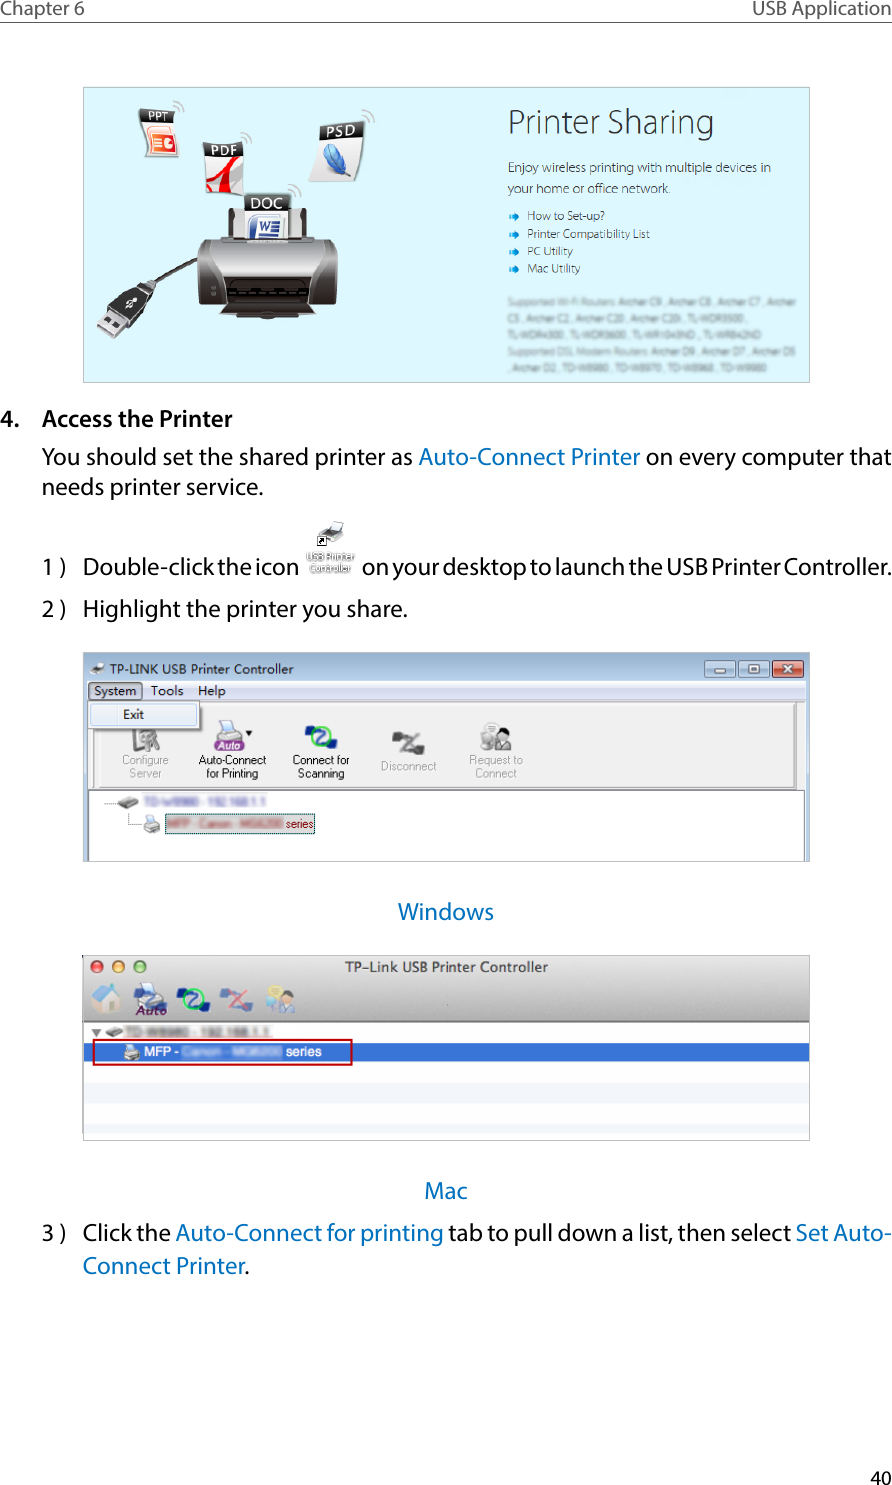 40Chapter 6 USB Application4.  Access the PrinterYou should set the shared printer as Auto-Connect Printer on every computer that needs printer service.1 )  Double-click the icon   on your desktop to launch the USB Printer Controller.2 )  Highlight the printer you share.WindowsMac3 )  Click the Auto-Connect for printing tab to pull down a list, then select Set Auto-Connect Printer.